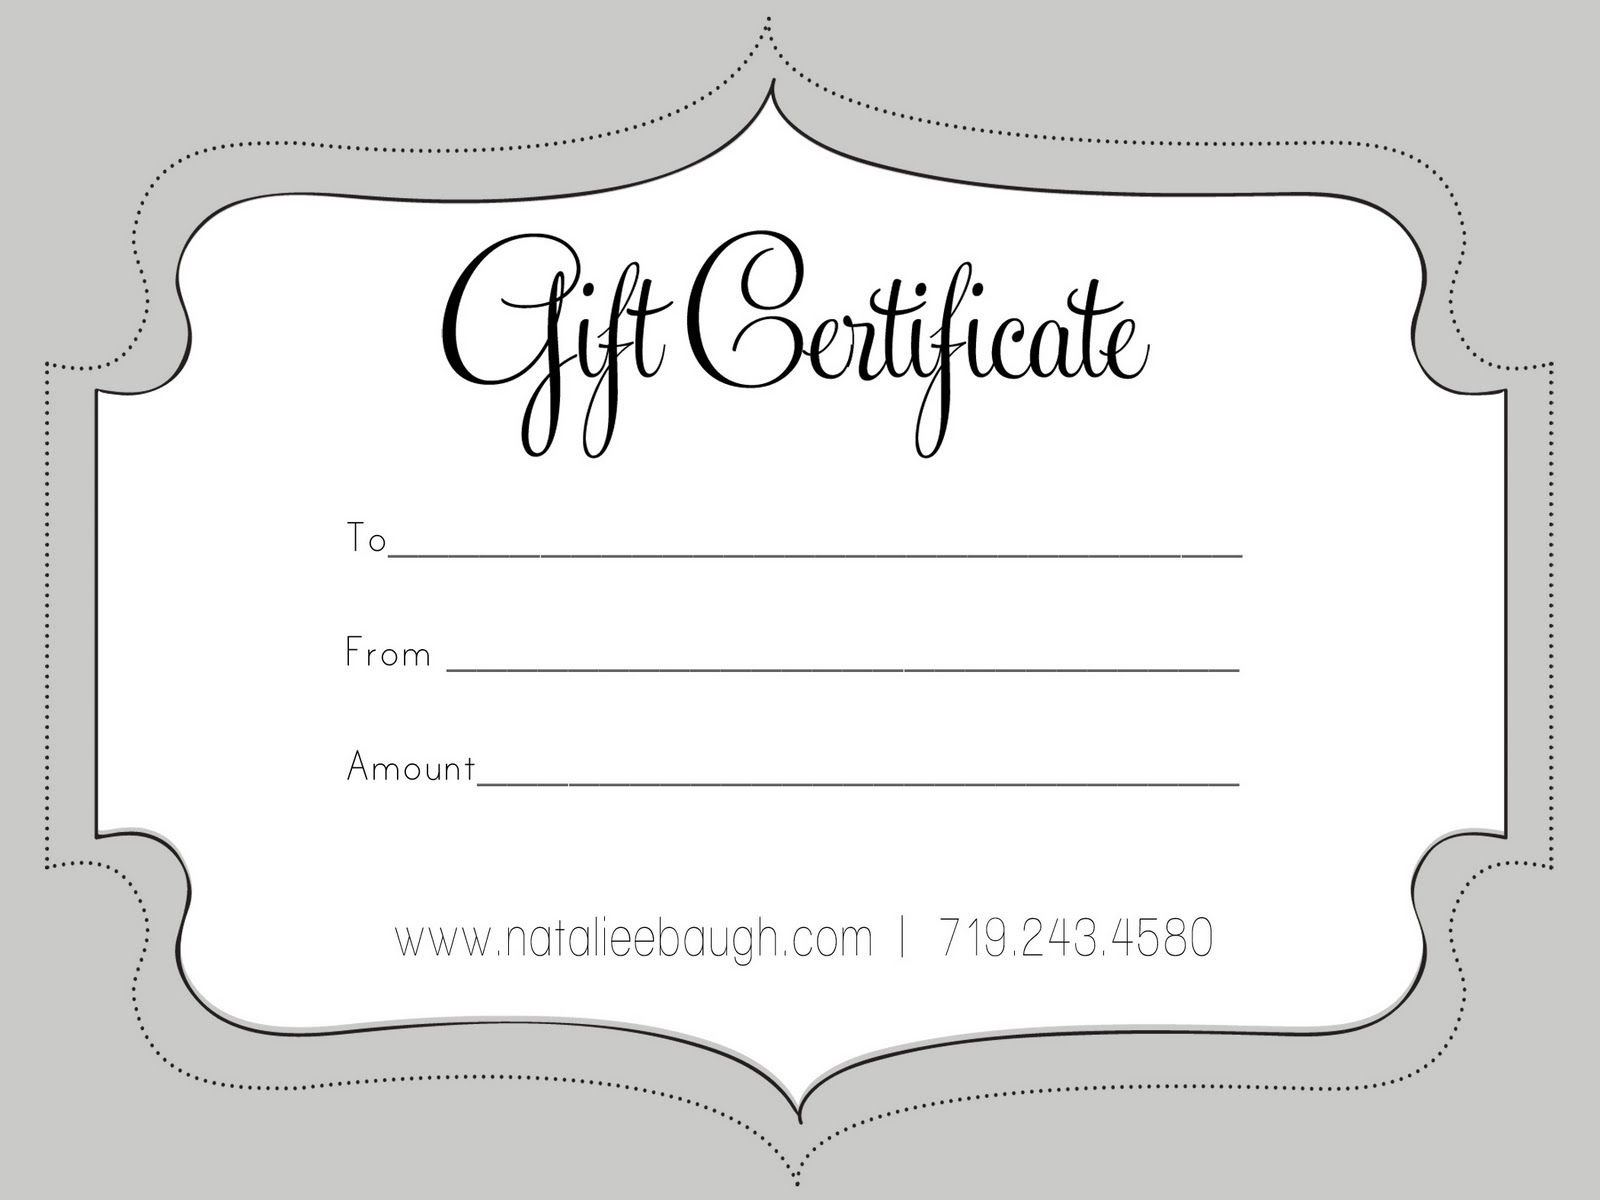 A Cute Looking Gift Certificate  S P A  Gift Certificate Template in Black And White Gift Certificate Template Free